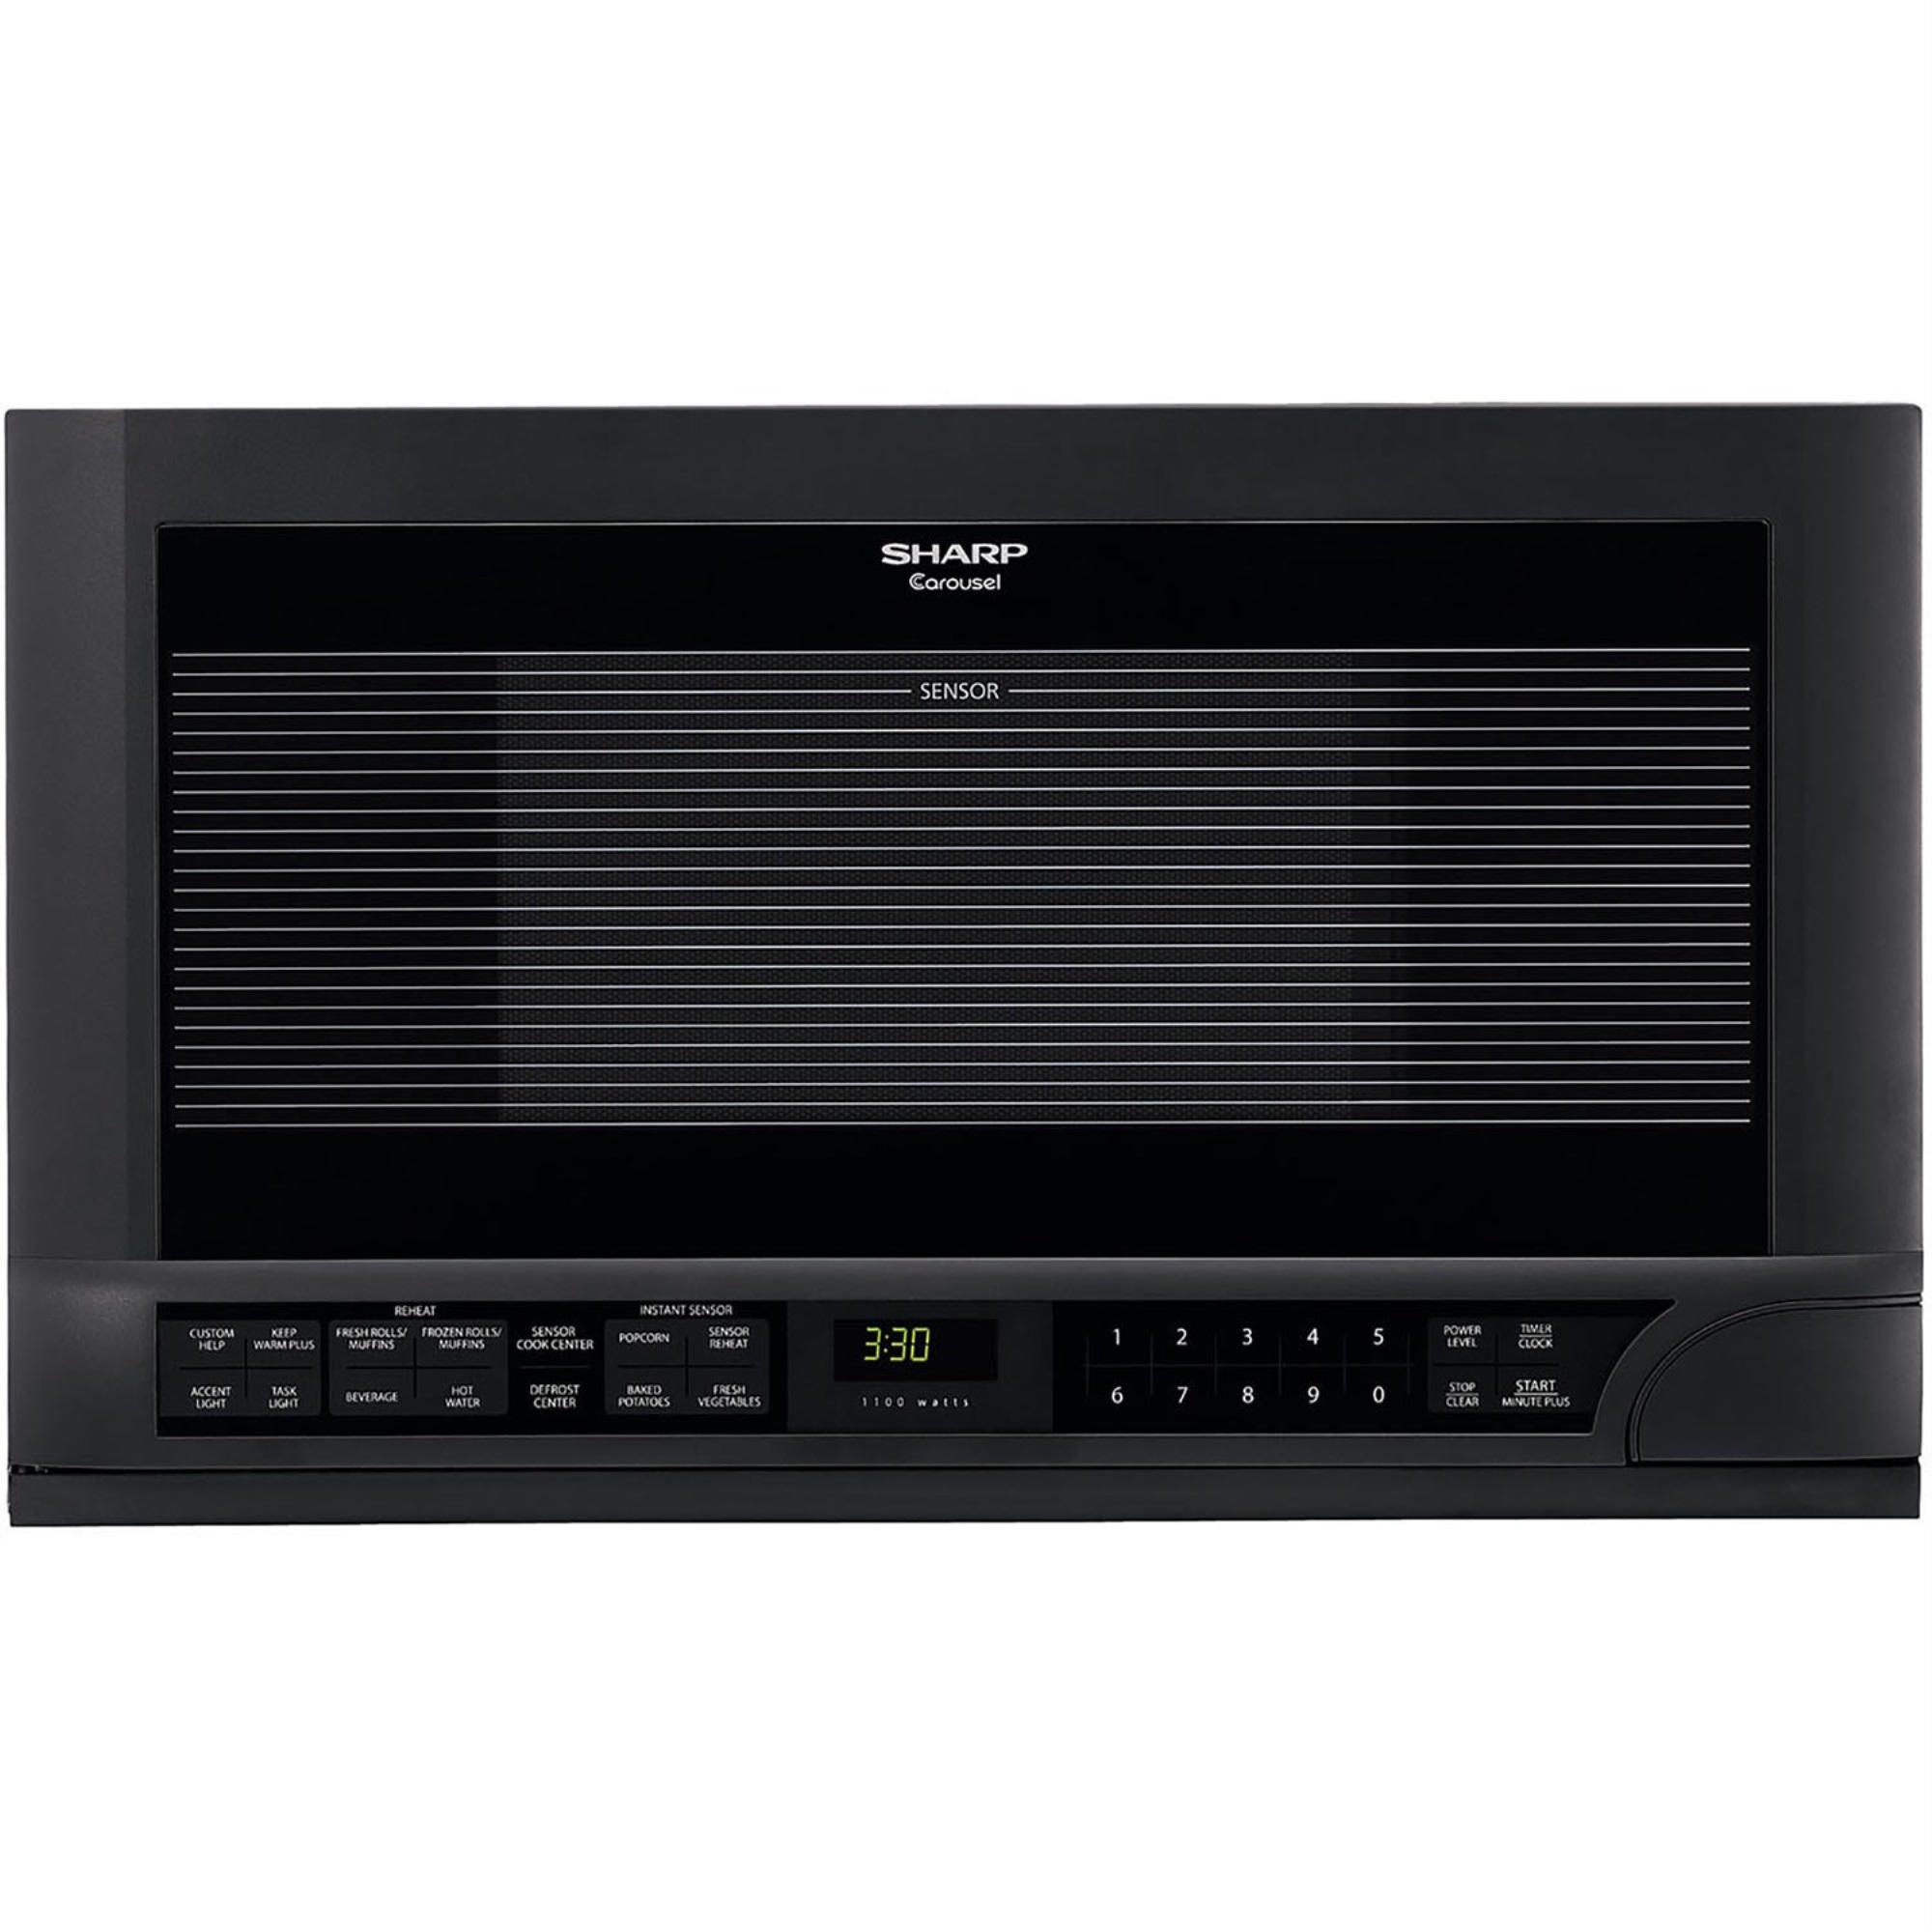 1.5 cu. ft. 1100W Black Sharp Over-the-Counter Carousel Microwave Oven (R1210TY) - image 1 of 3